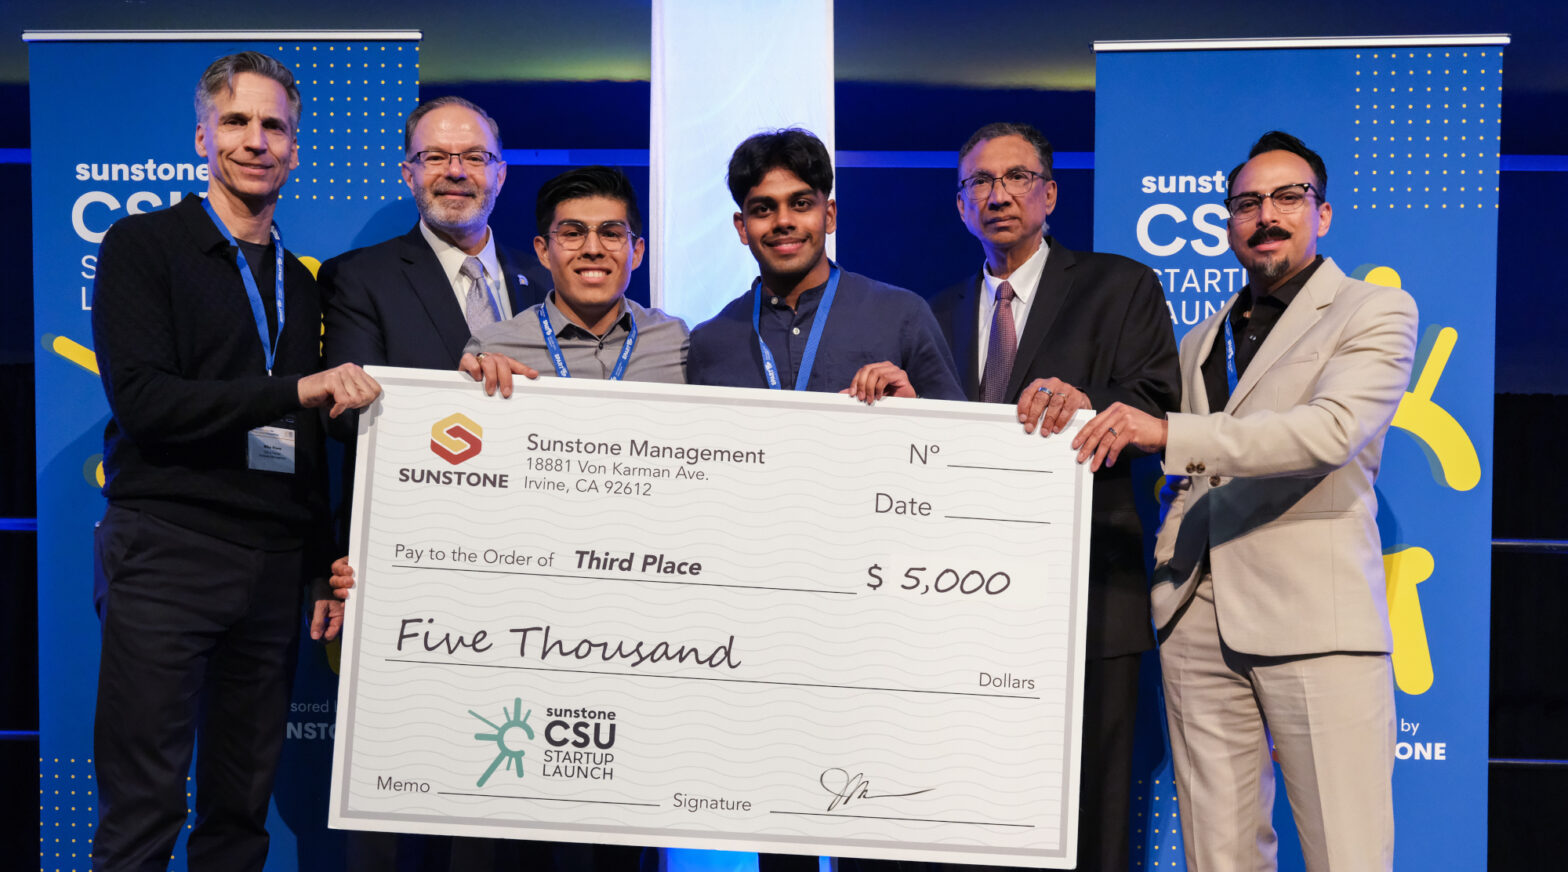 Social Impact Success Story: CSUF Students on Winning Third Place at Sunstone CSU Startup Launch Competition